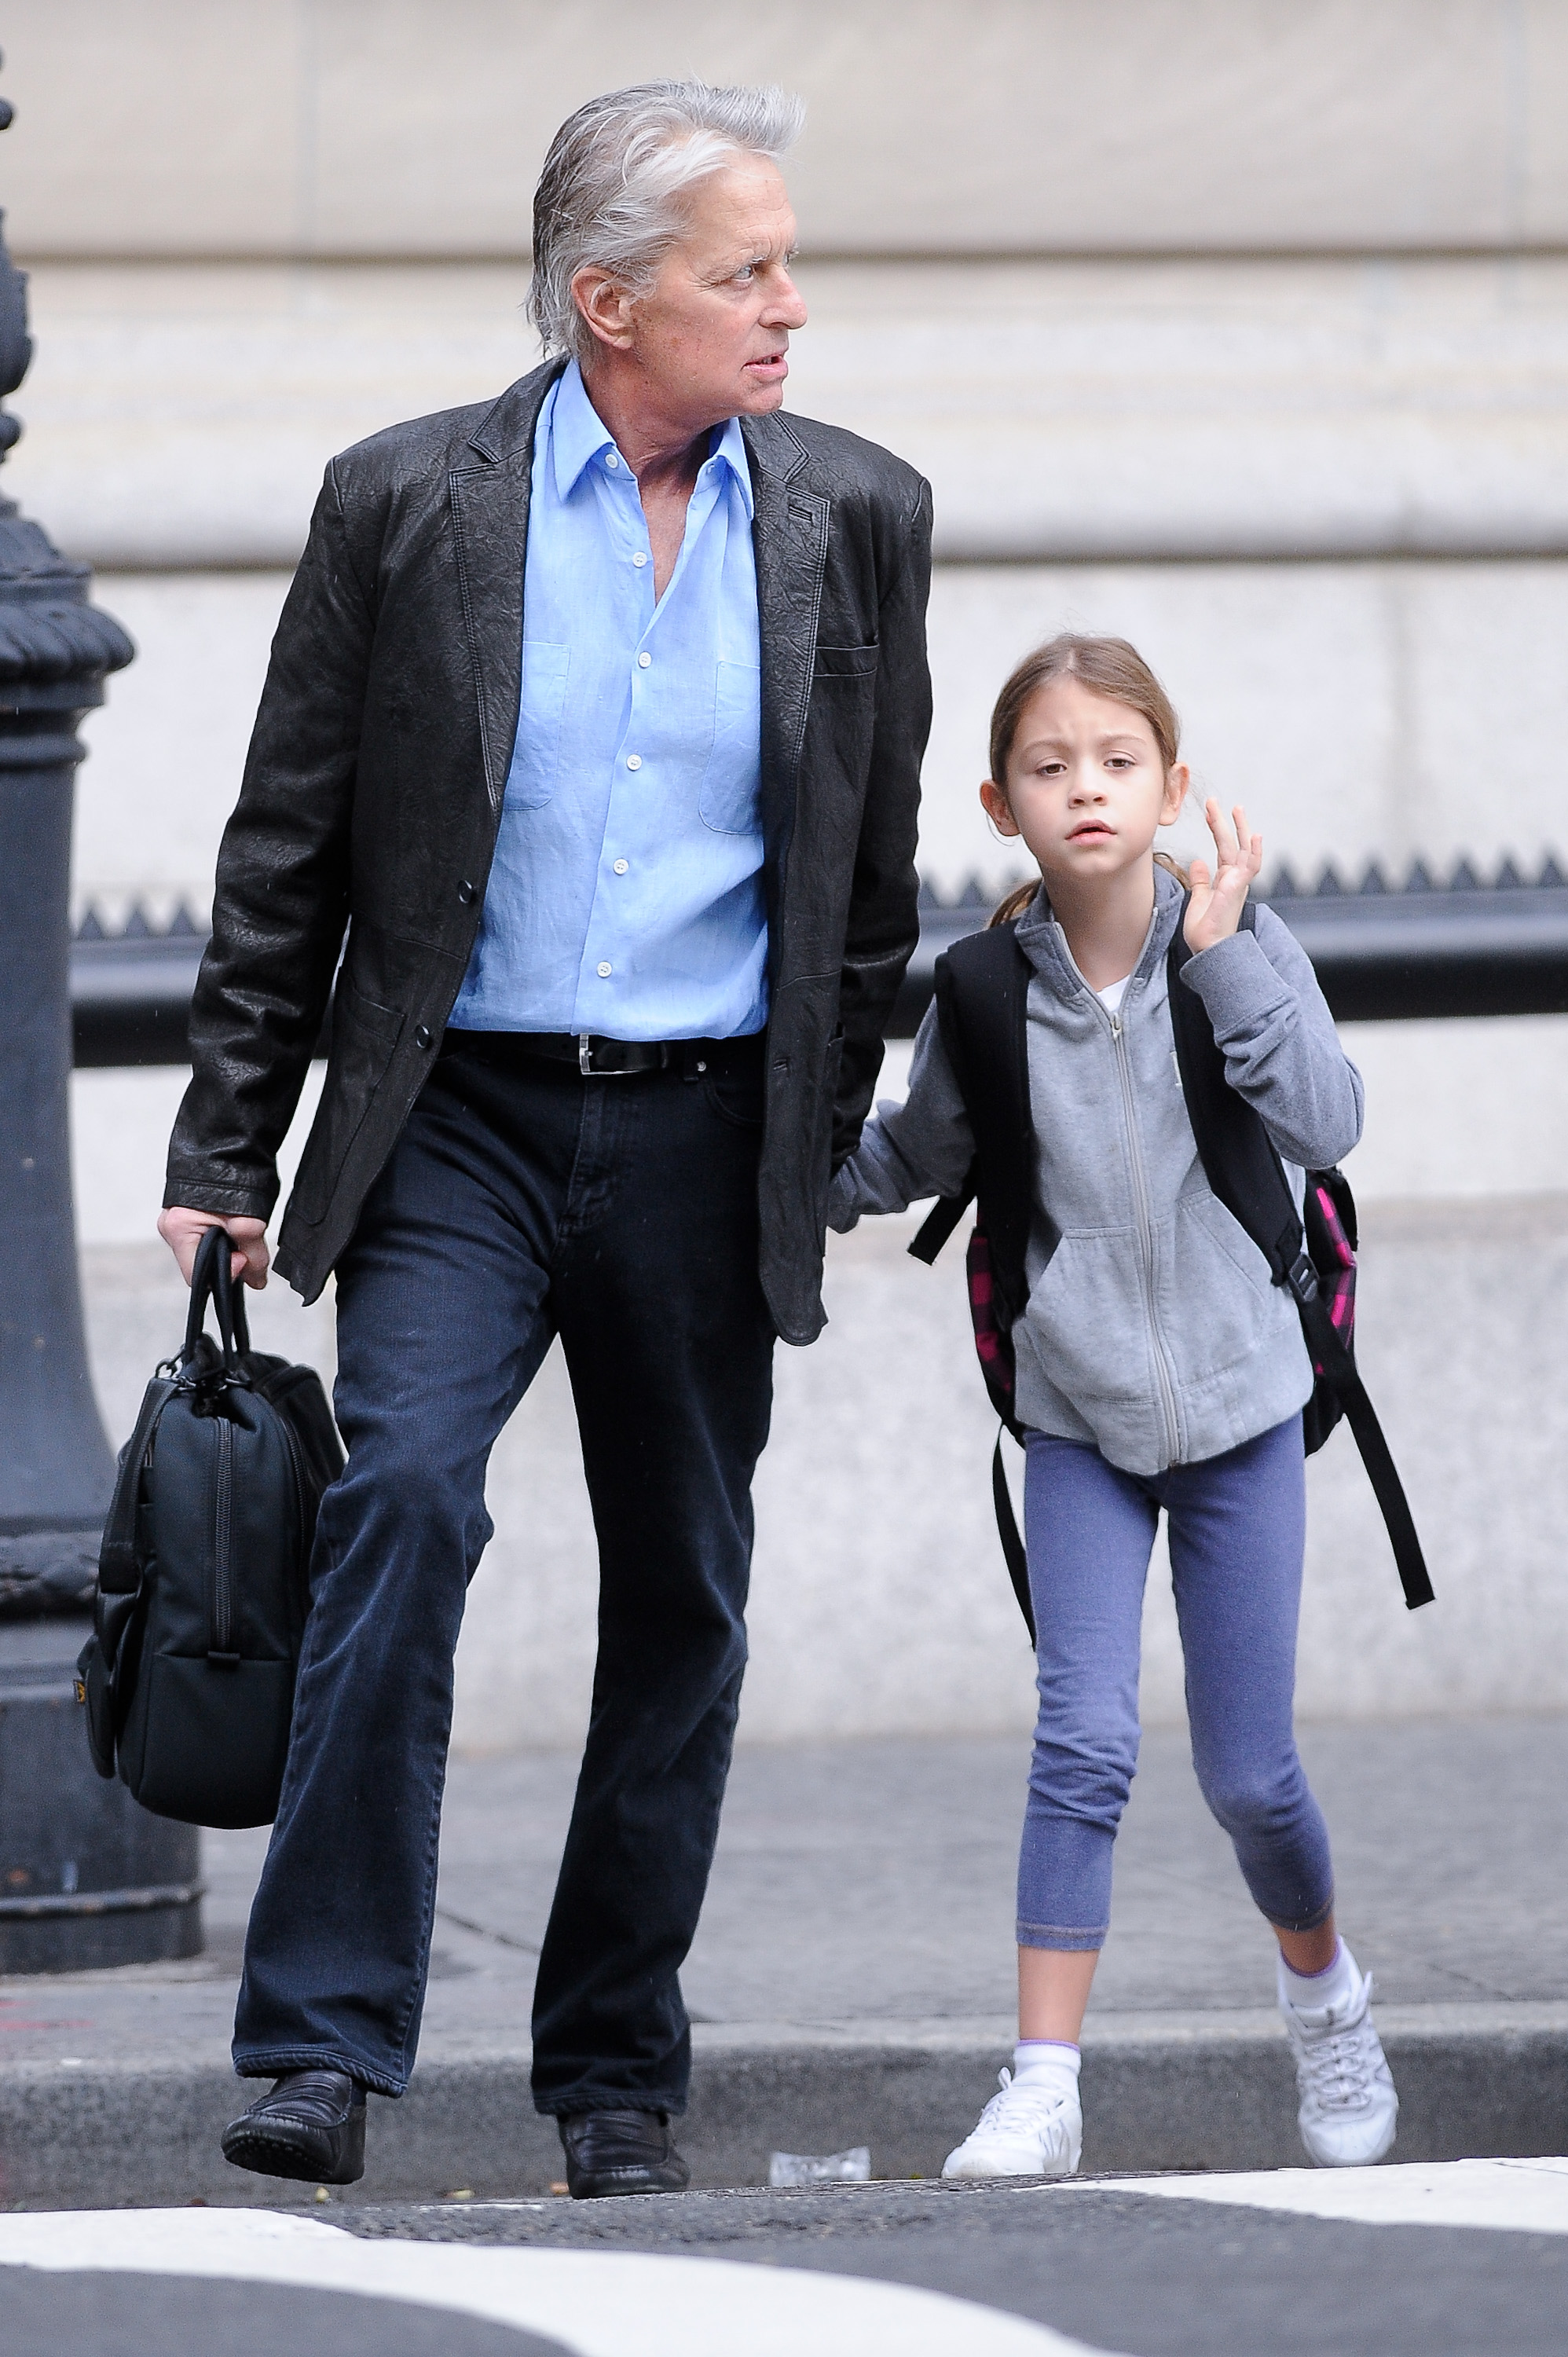 Michael Douglas and daughter Carys in Manhattan, New York City on October 7, 2010 | Source: Getty Images